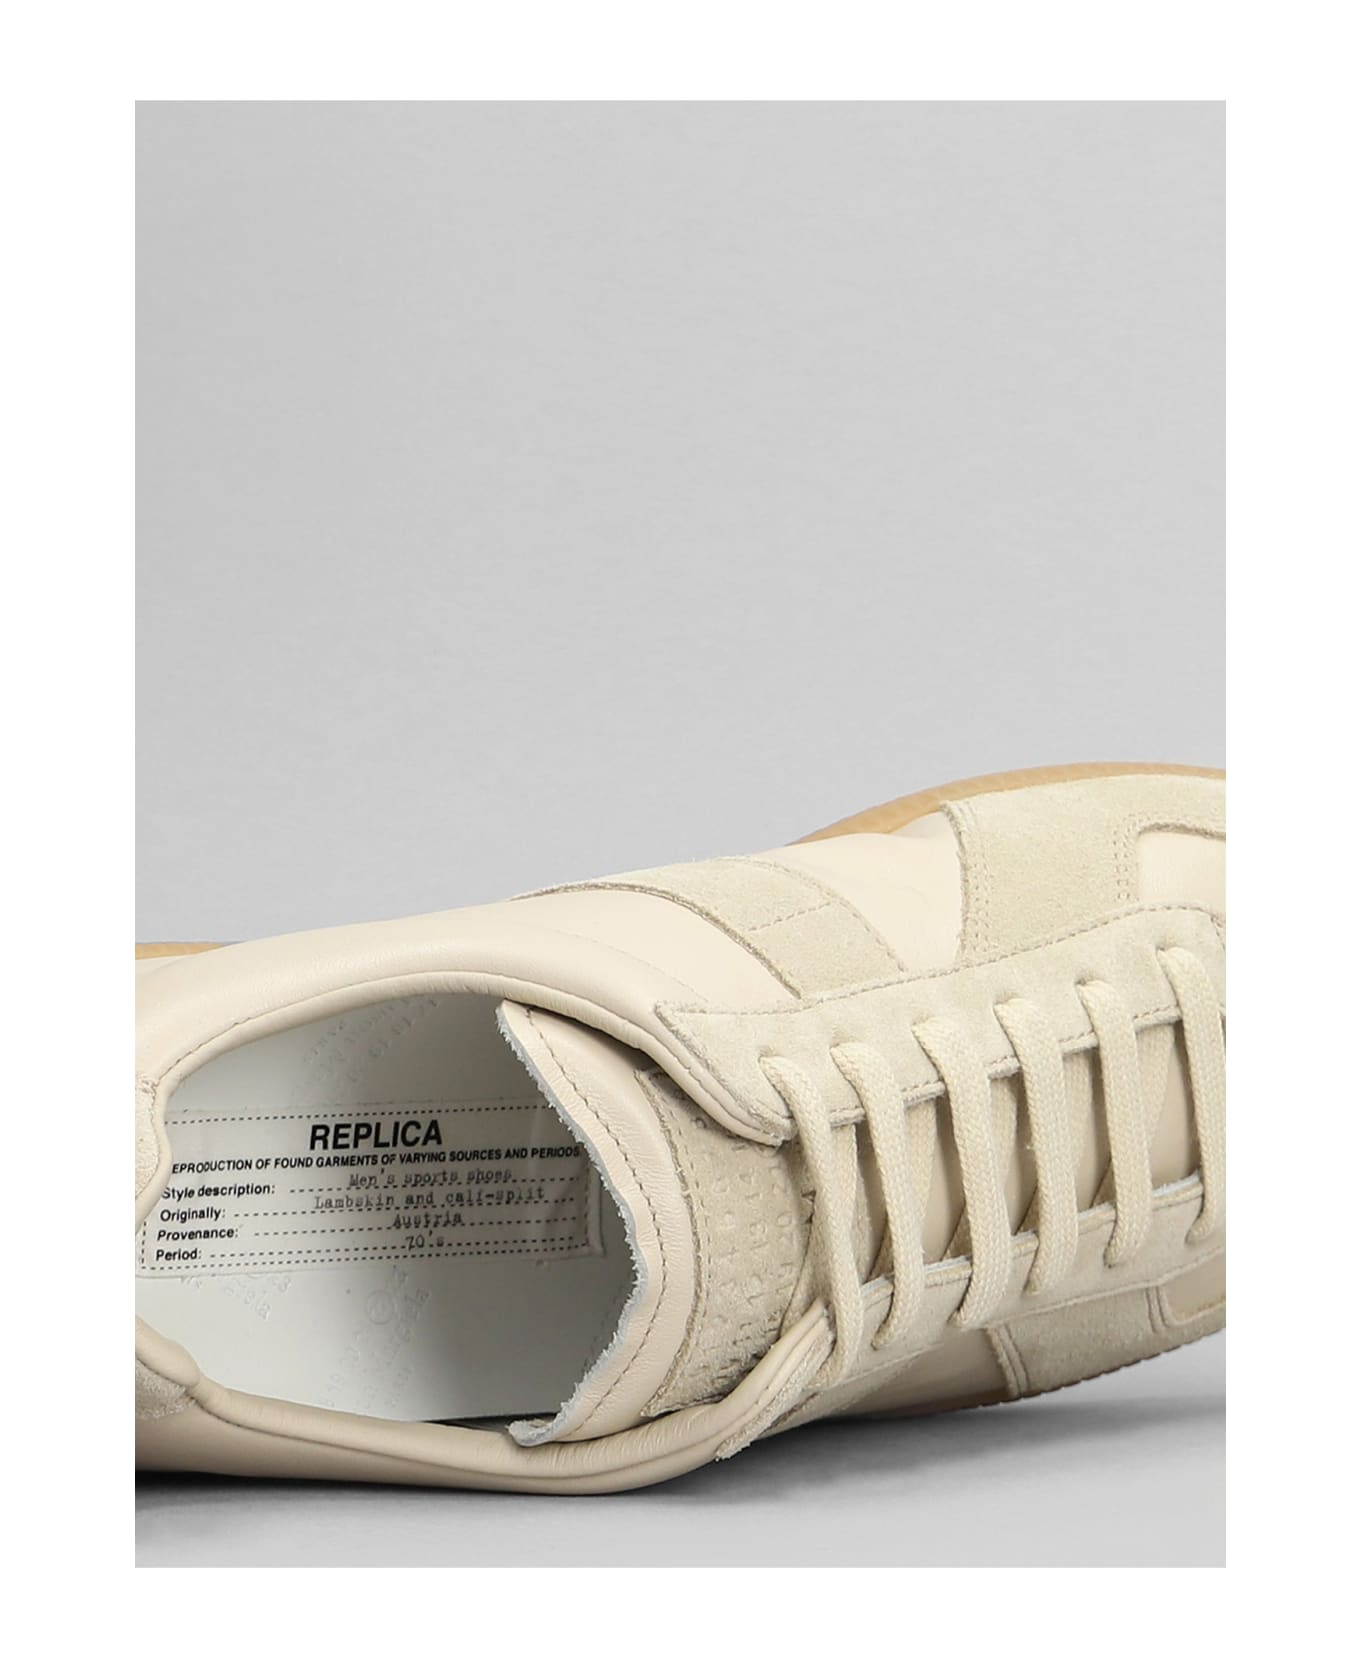 Maison Margiela Replica Sneakers In Beige Suede And Leather - beige スニーカー